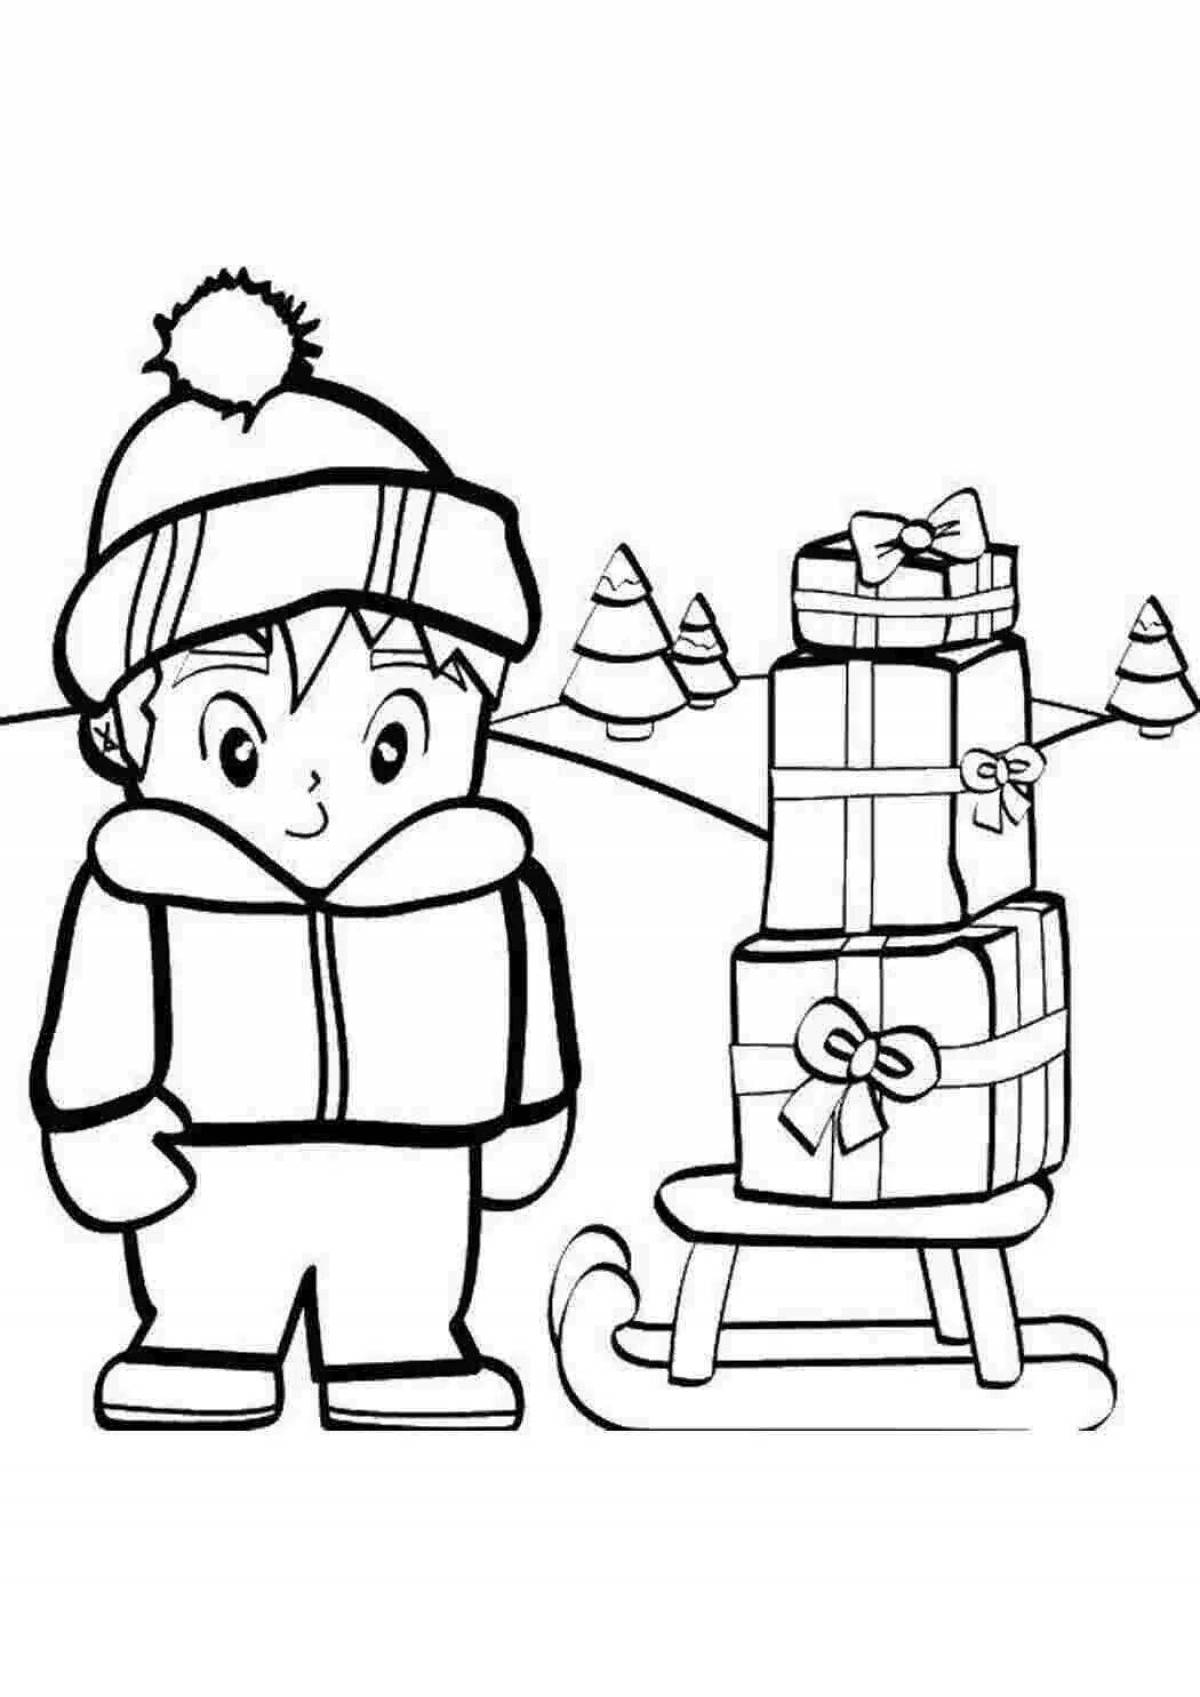 Large winter coloring book for boys